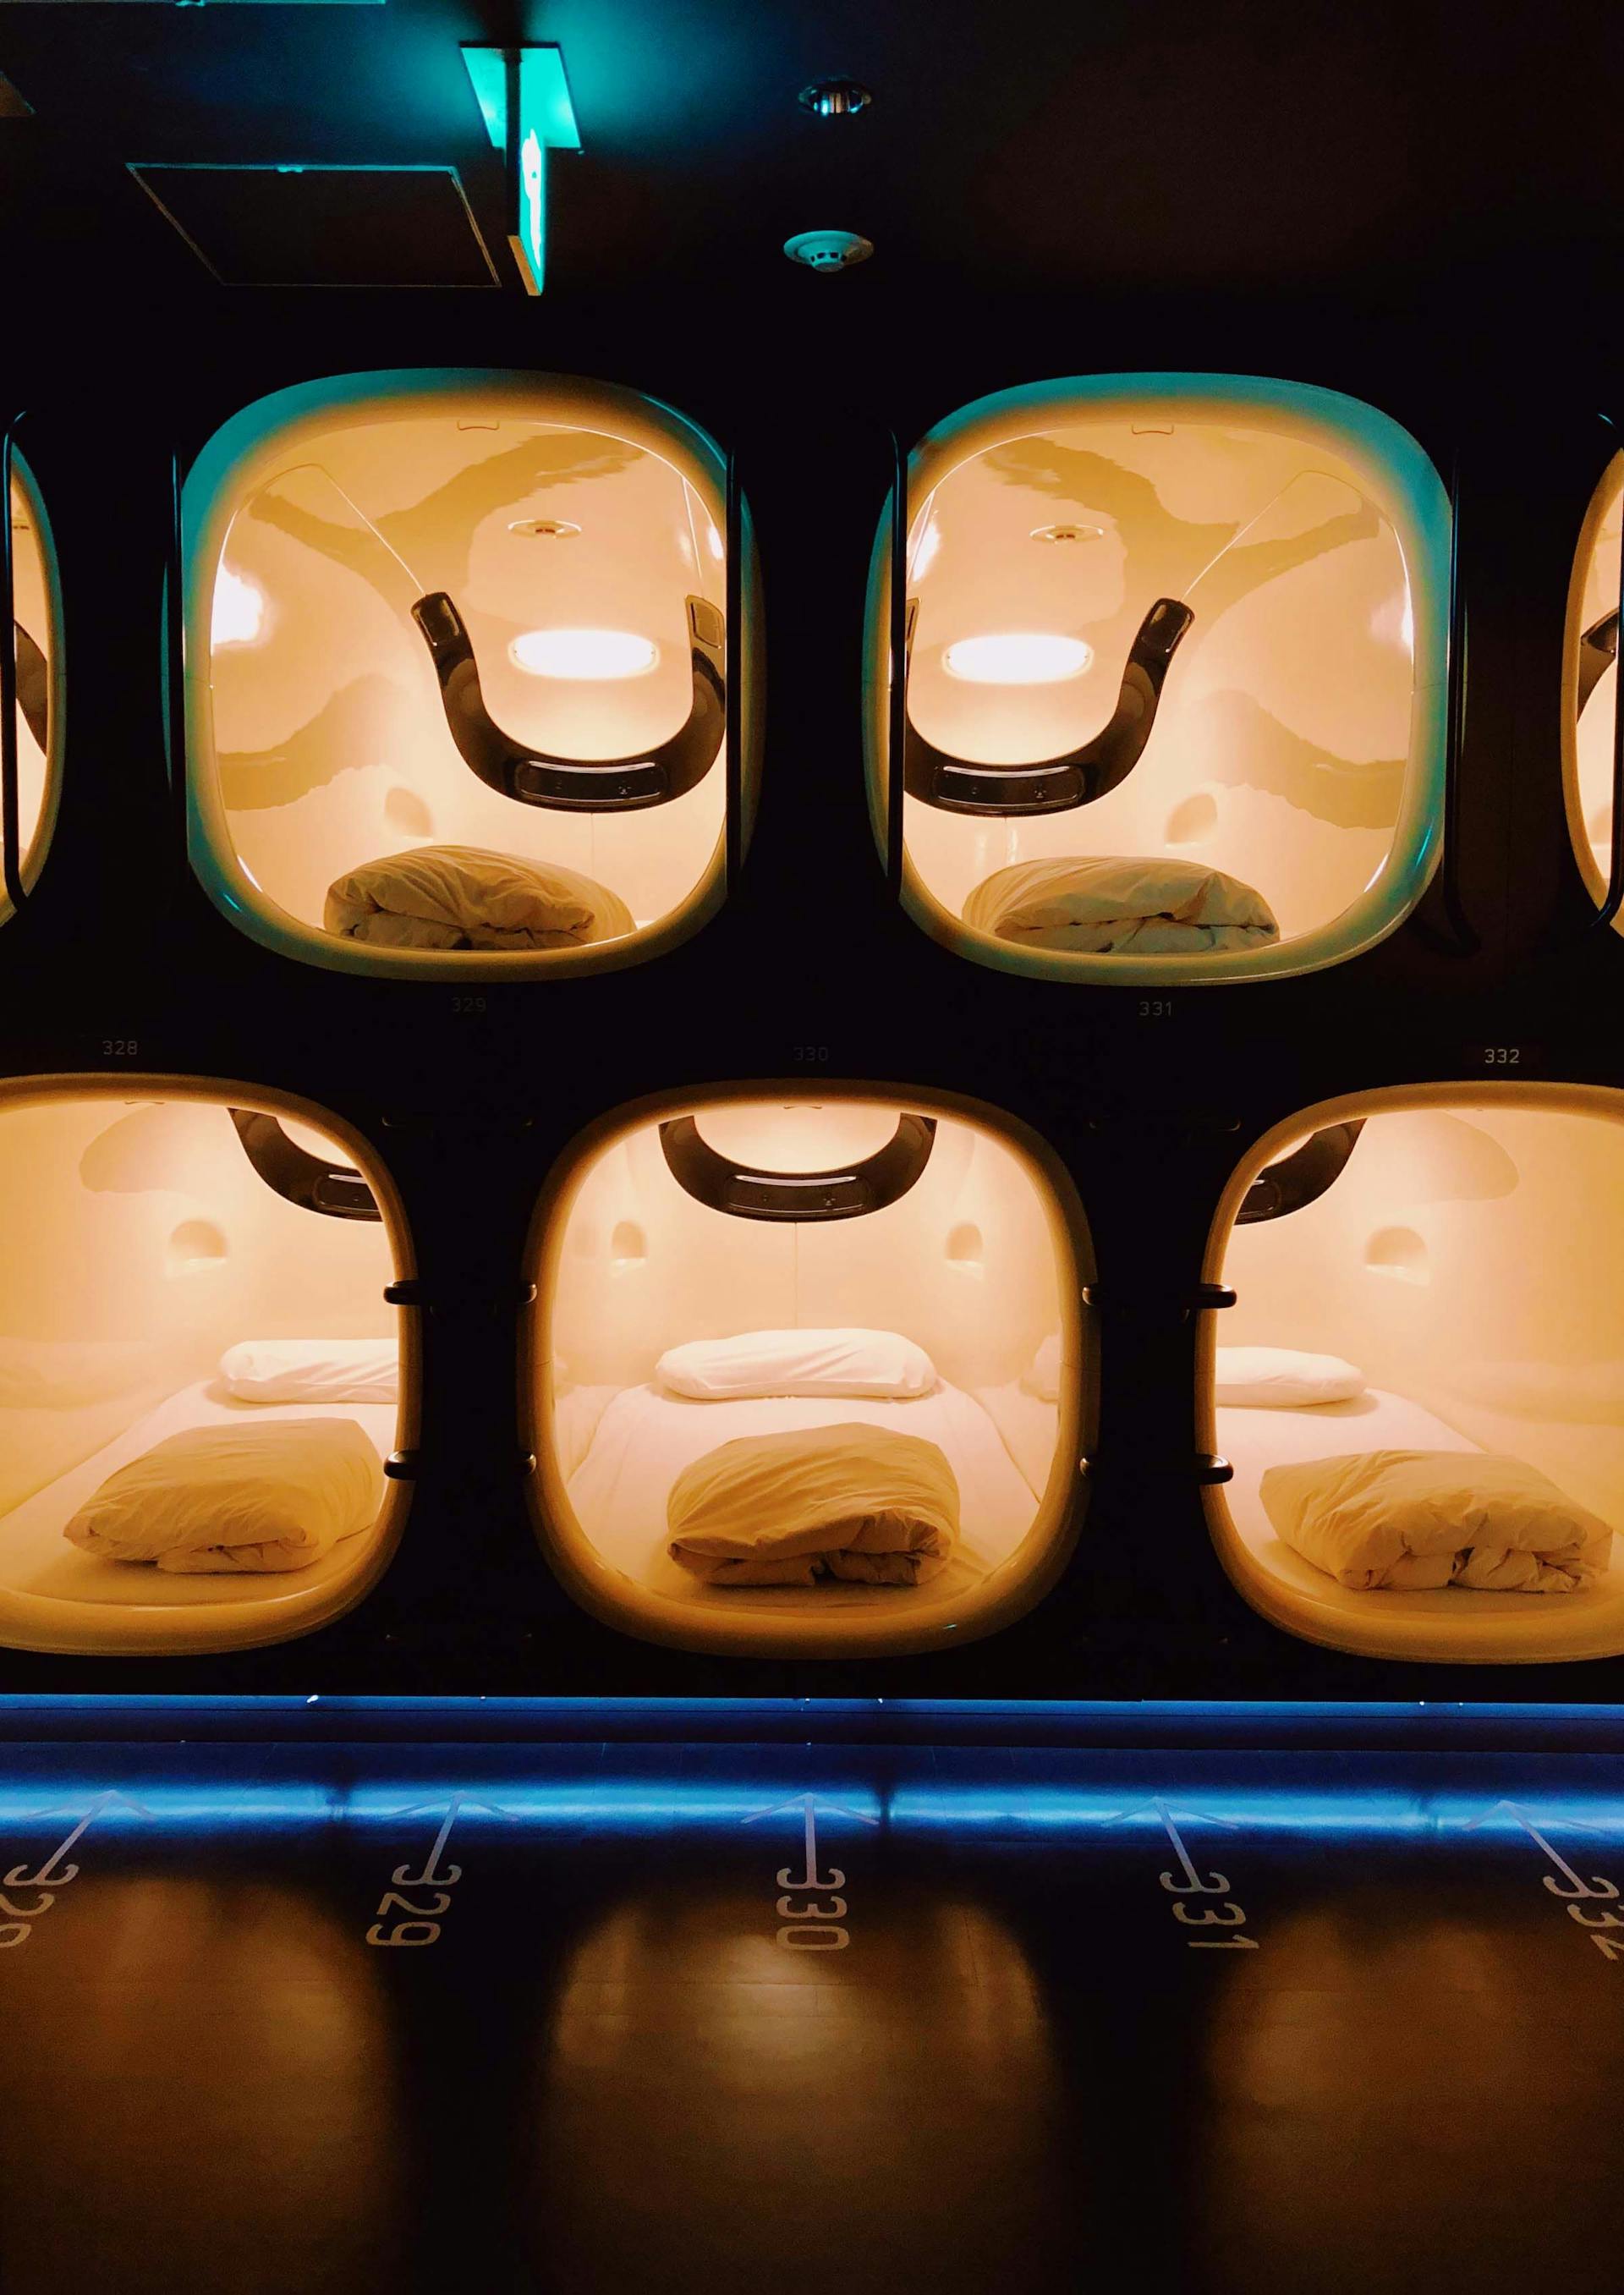 Capsule hotel pods. Photo source: Alec Favale from Unsplash